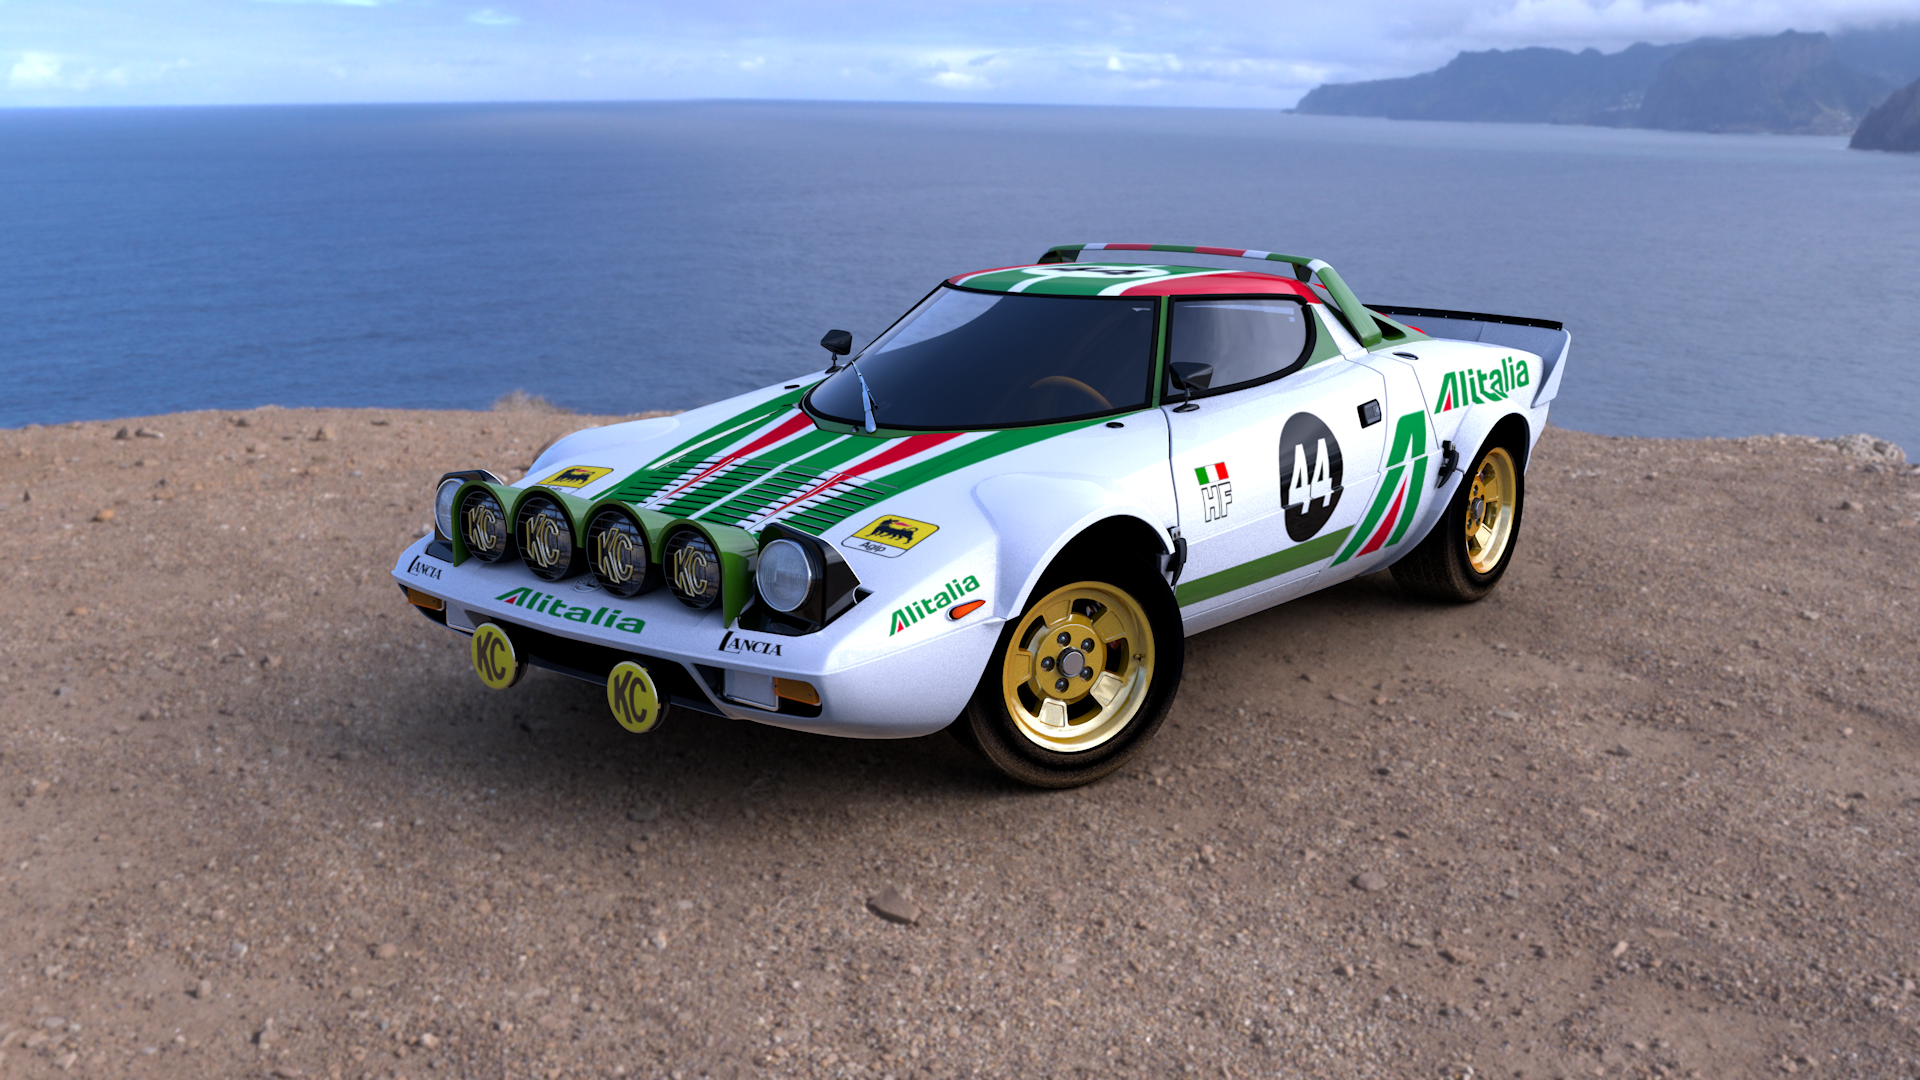 General 1920x1080 Lancia Stratos car racing race cars Italy pop-up headlights Castrol livery colored wheels rally cars livery italian cars Stellantis Lancia (cars)